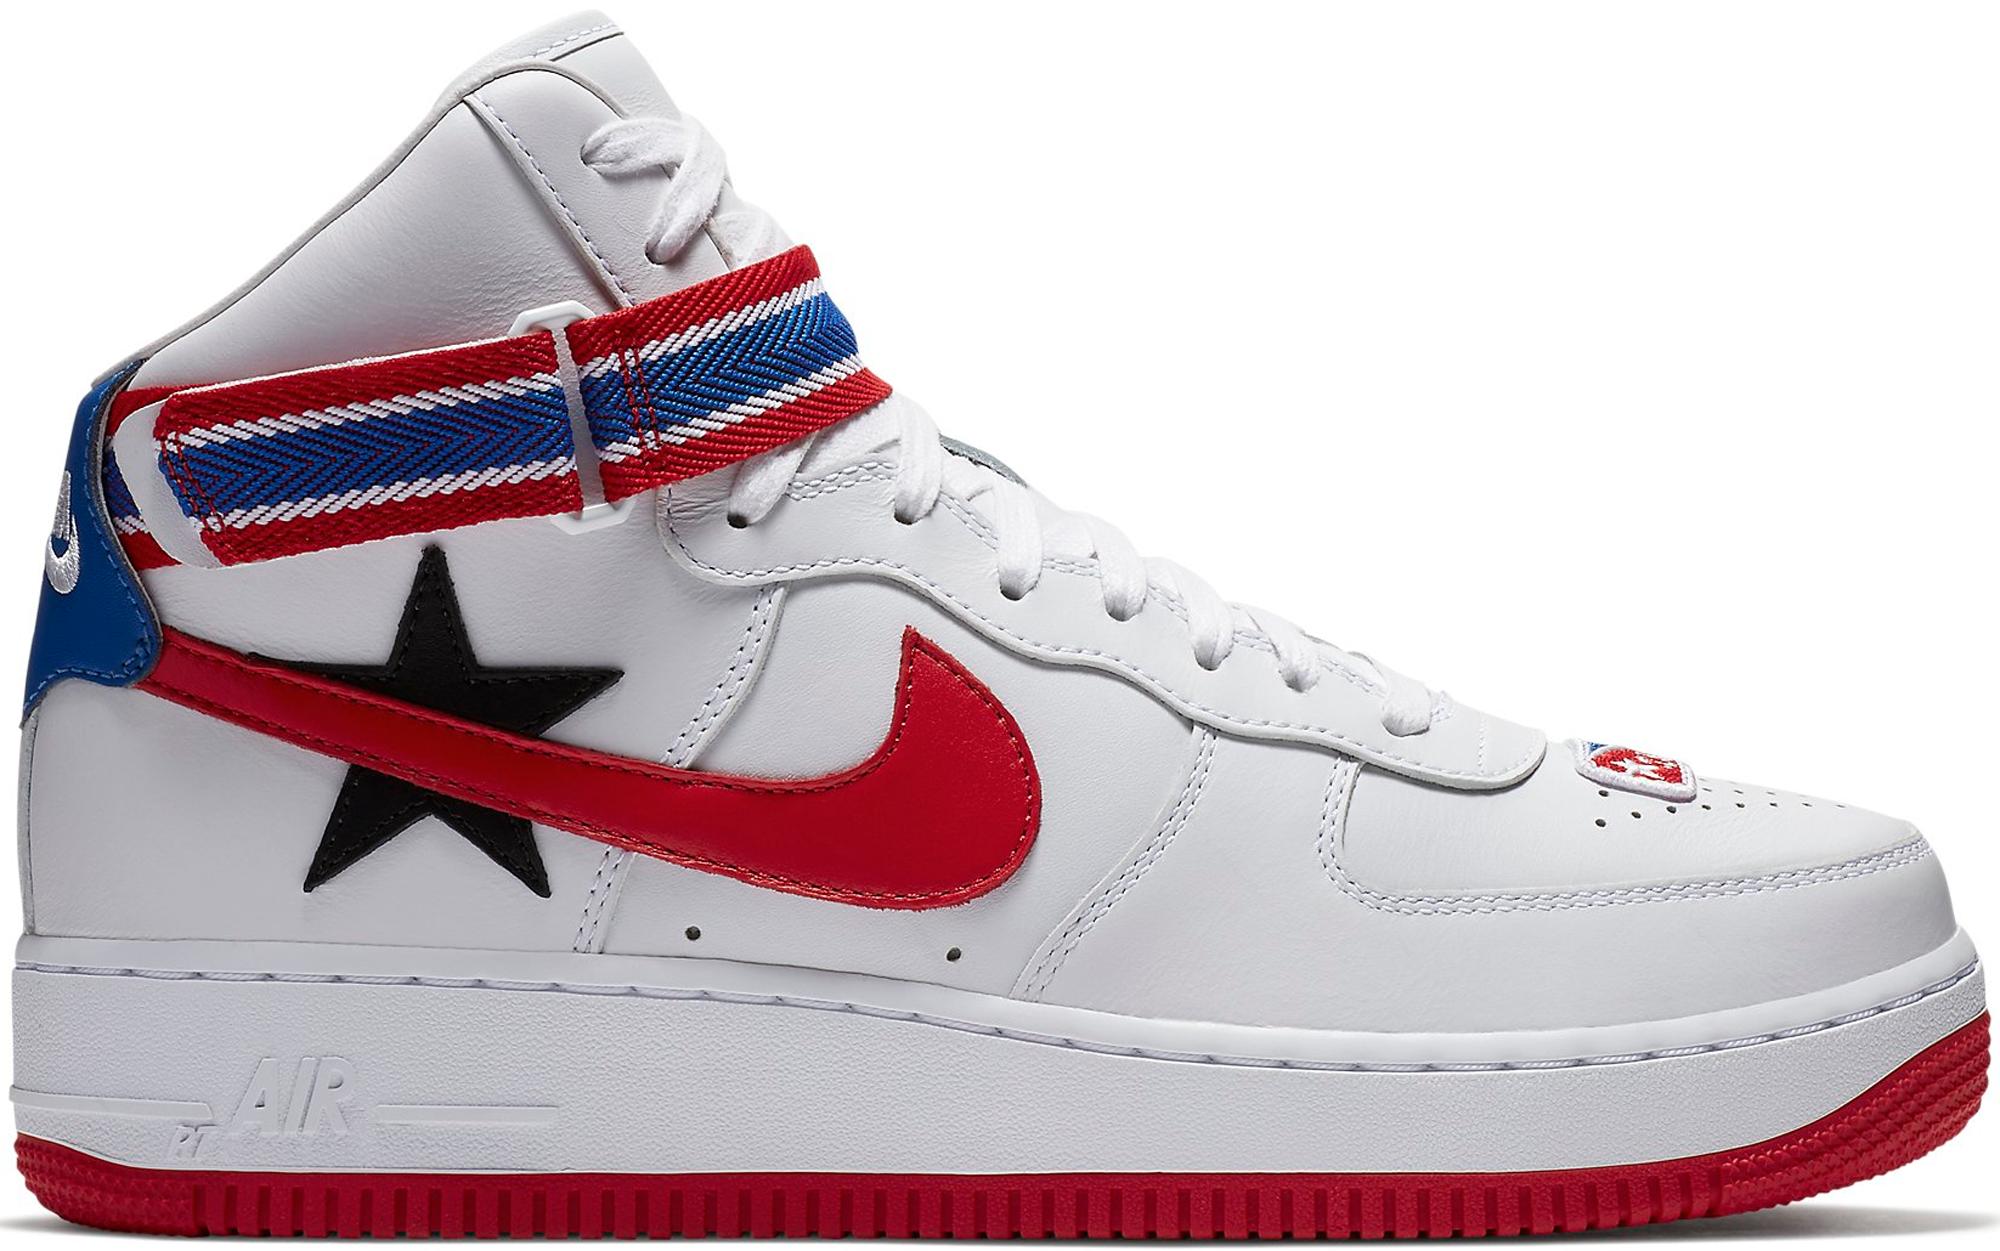 Nike Leather Air Force 1 High Riccardo Tisci Victorious Minotaurs White ...